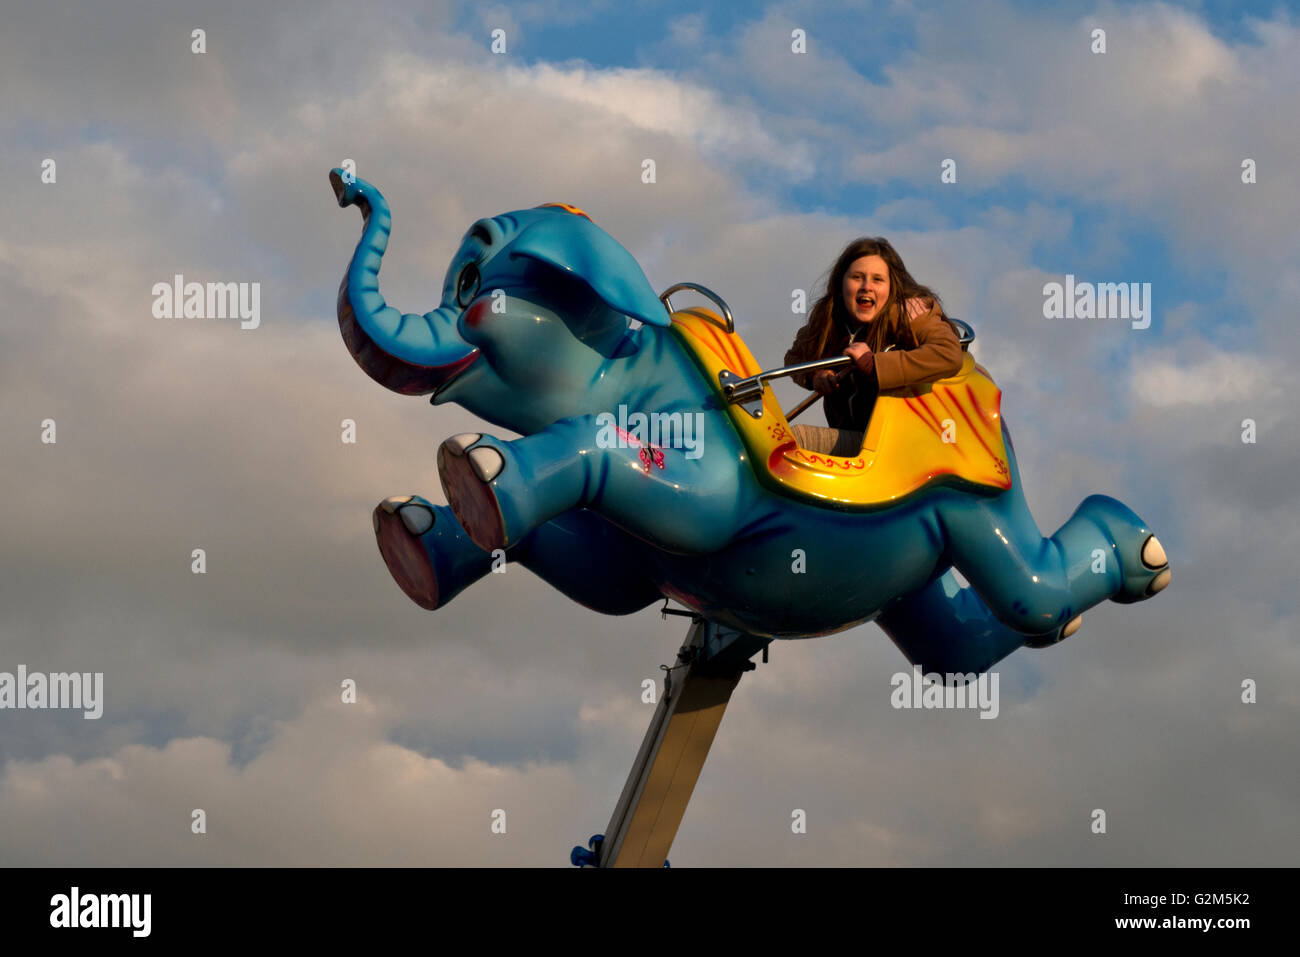 Model released image of a young girl on a ride at Southsea funfair, Portsmouth, Hampshire, UK Stock Photo